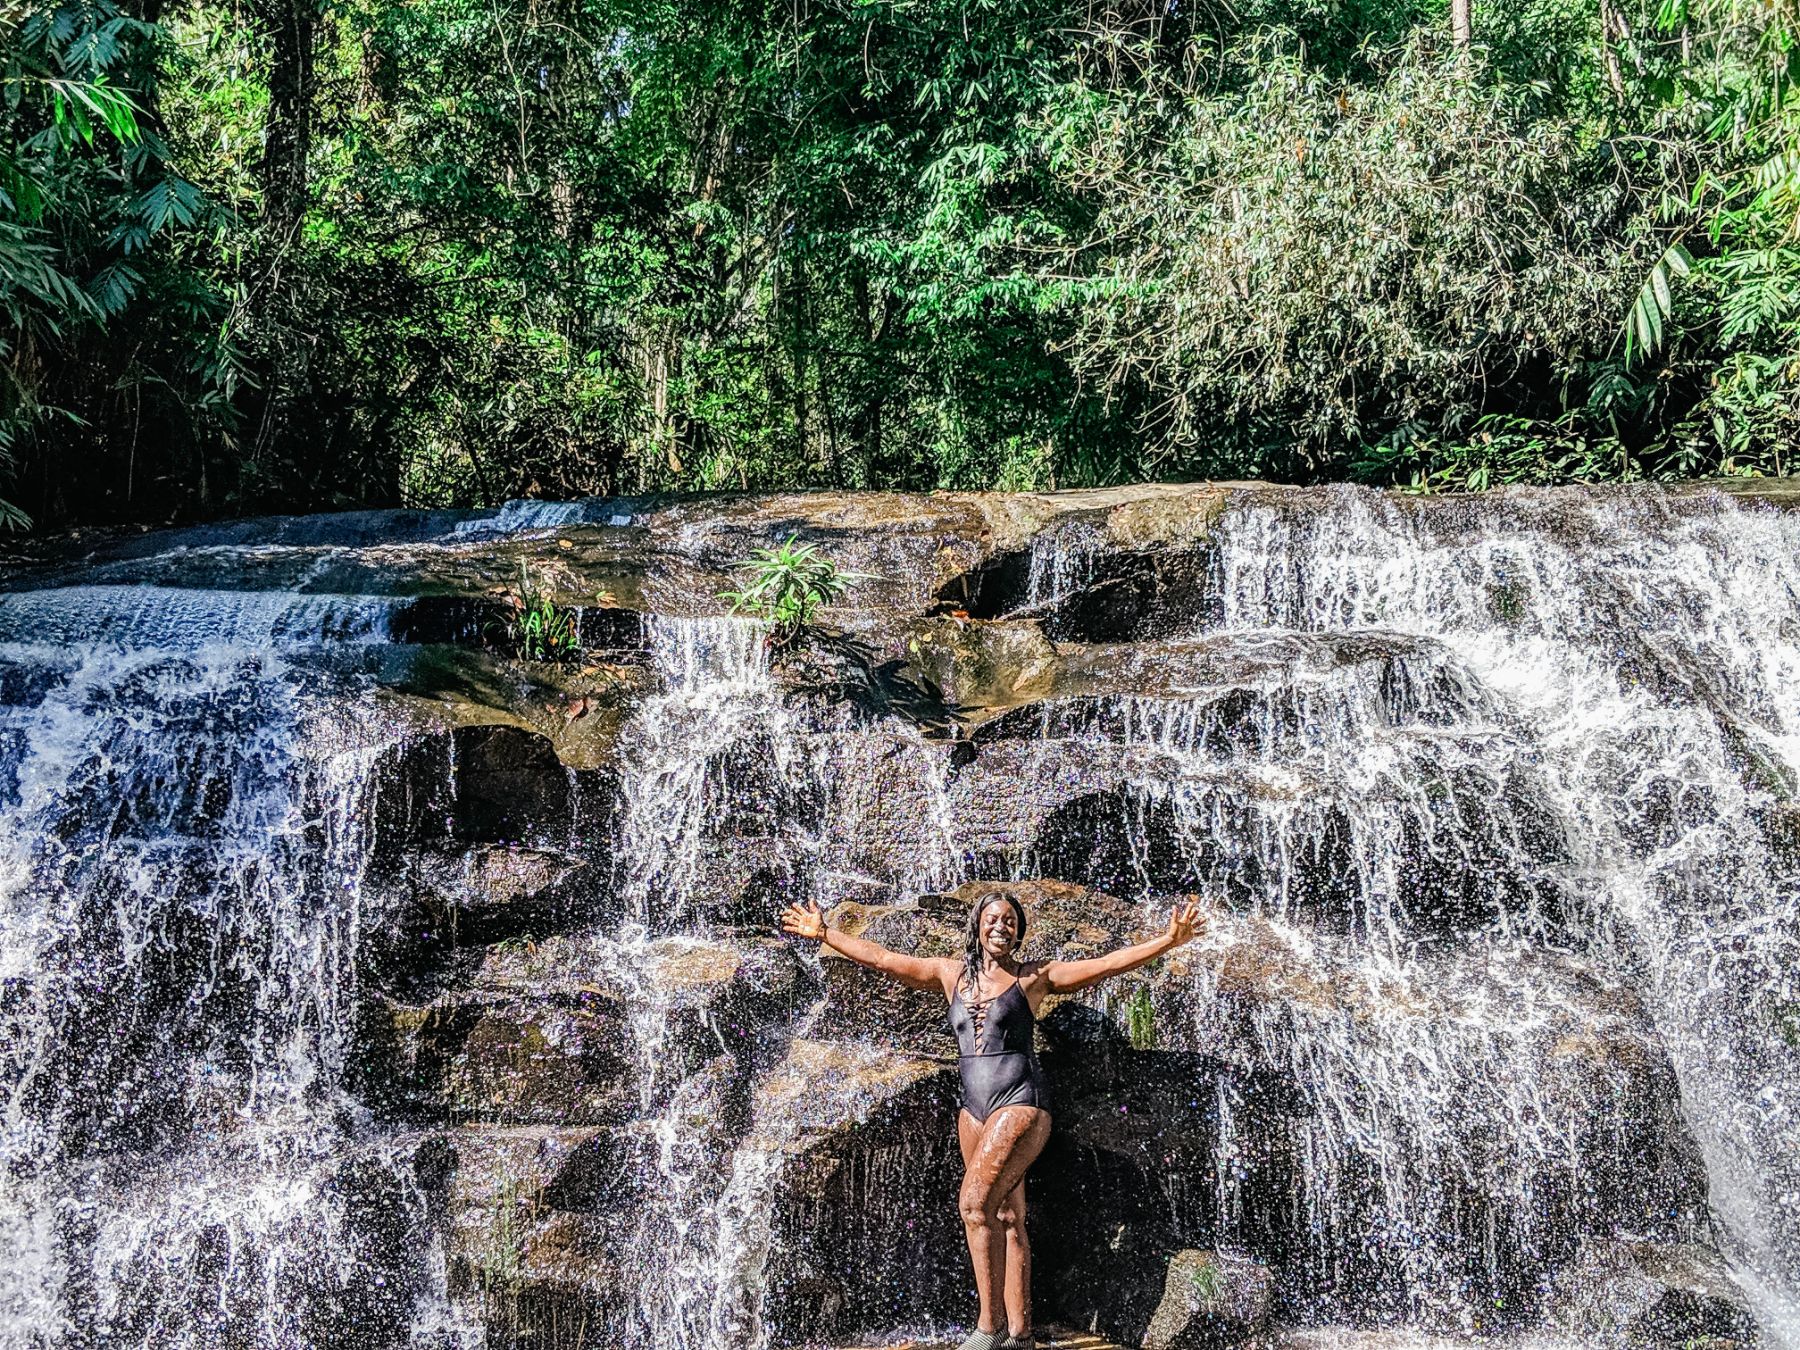 Experiencing my first natural waterfall in Thailand